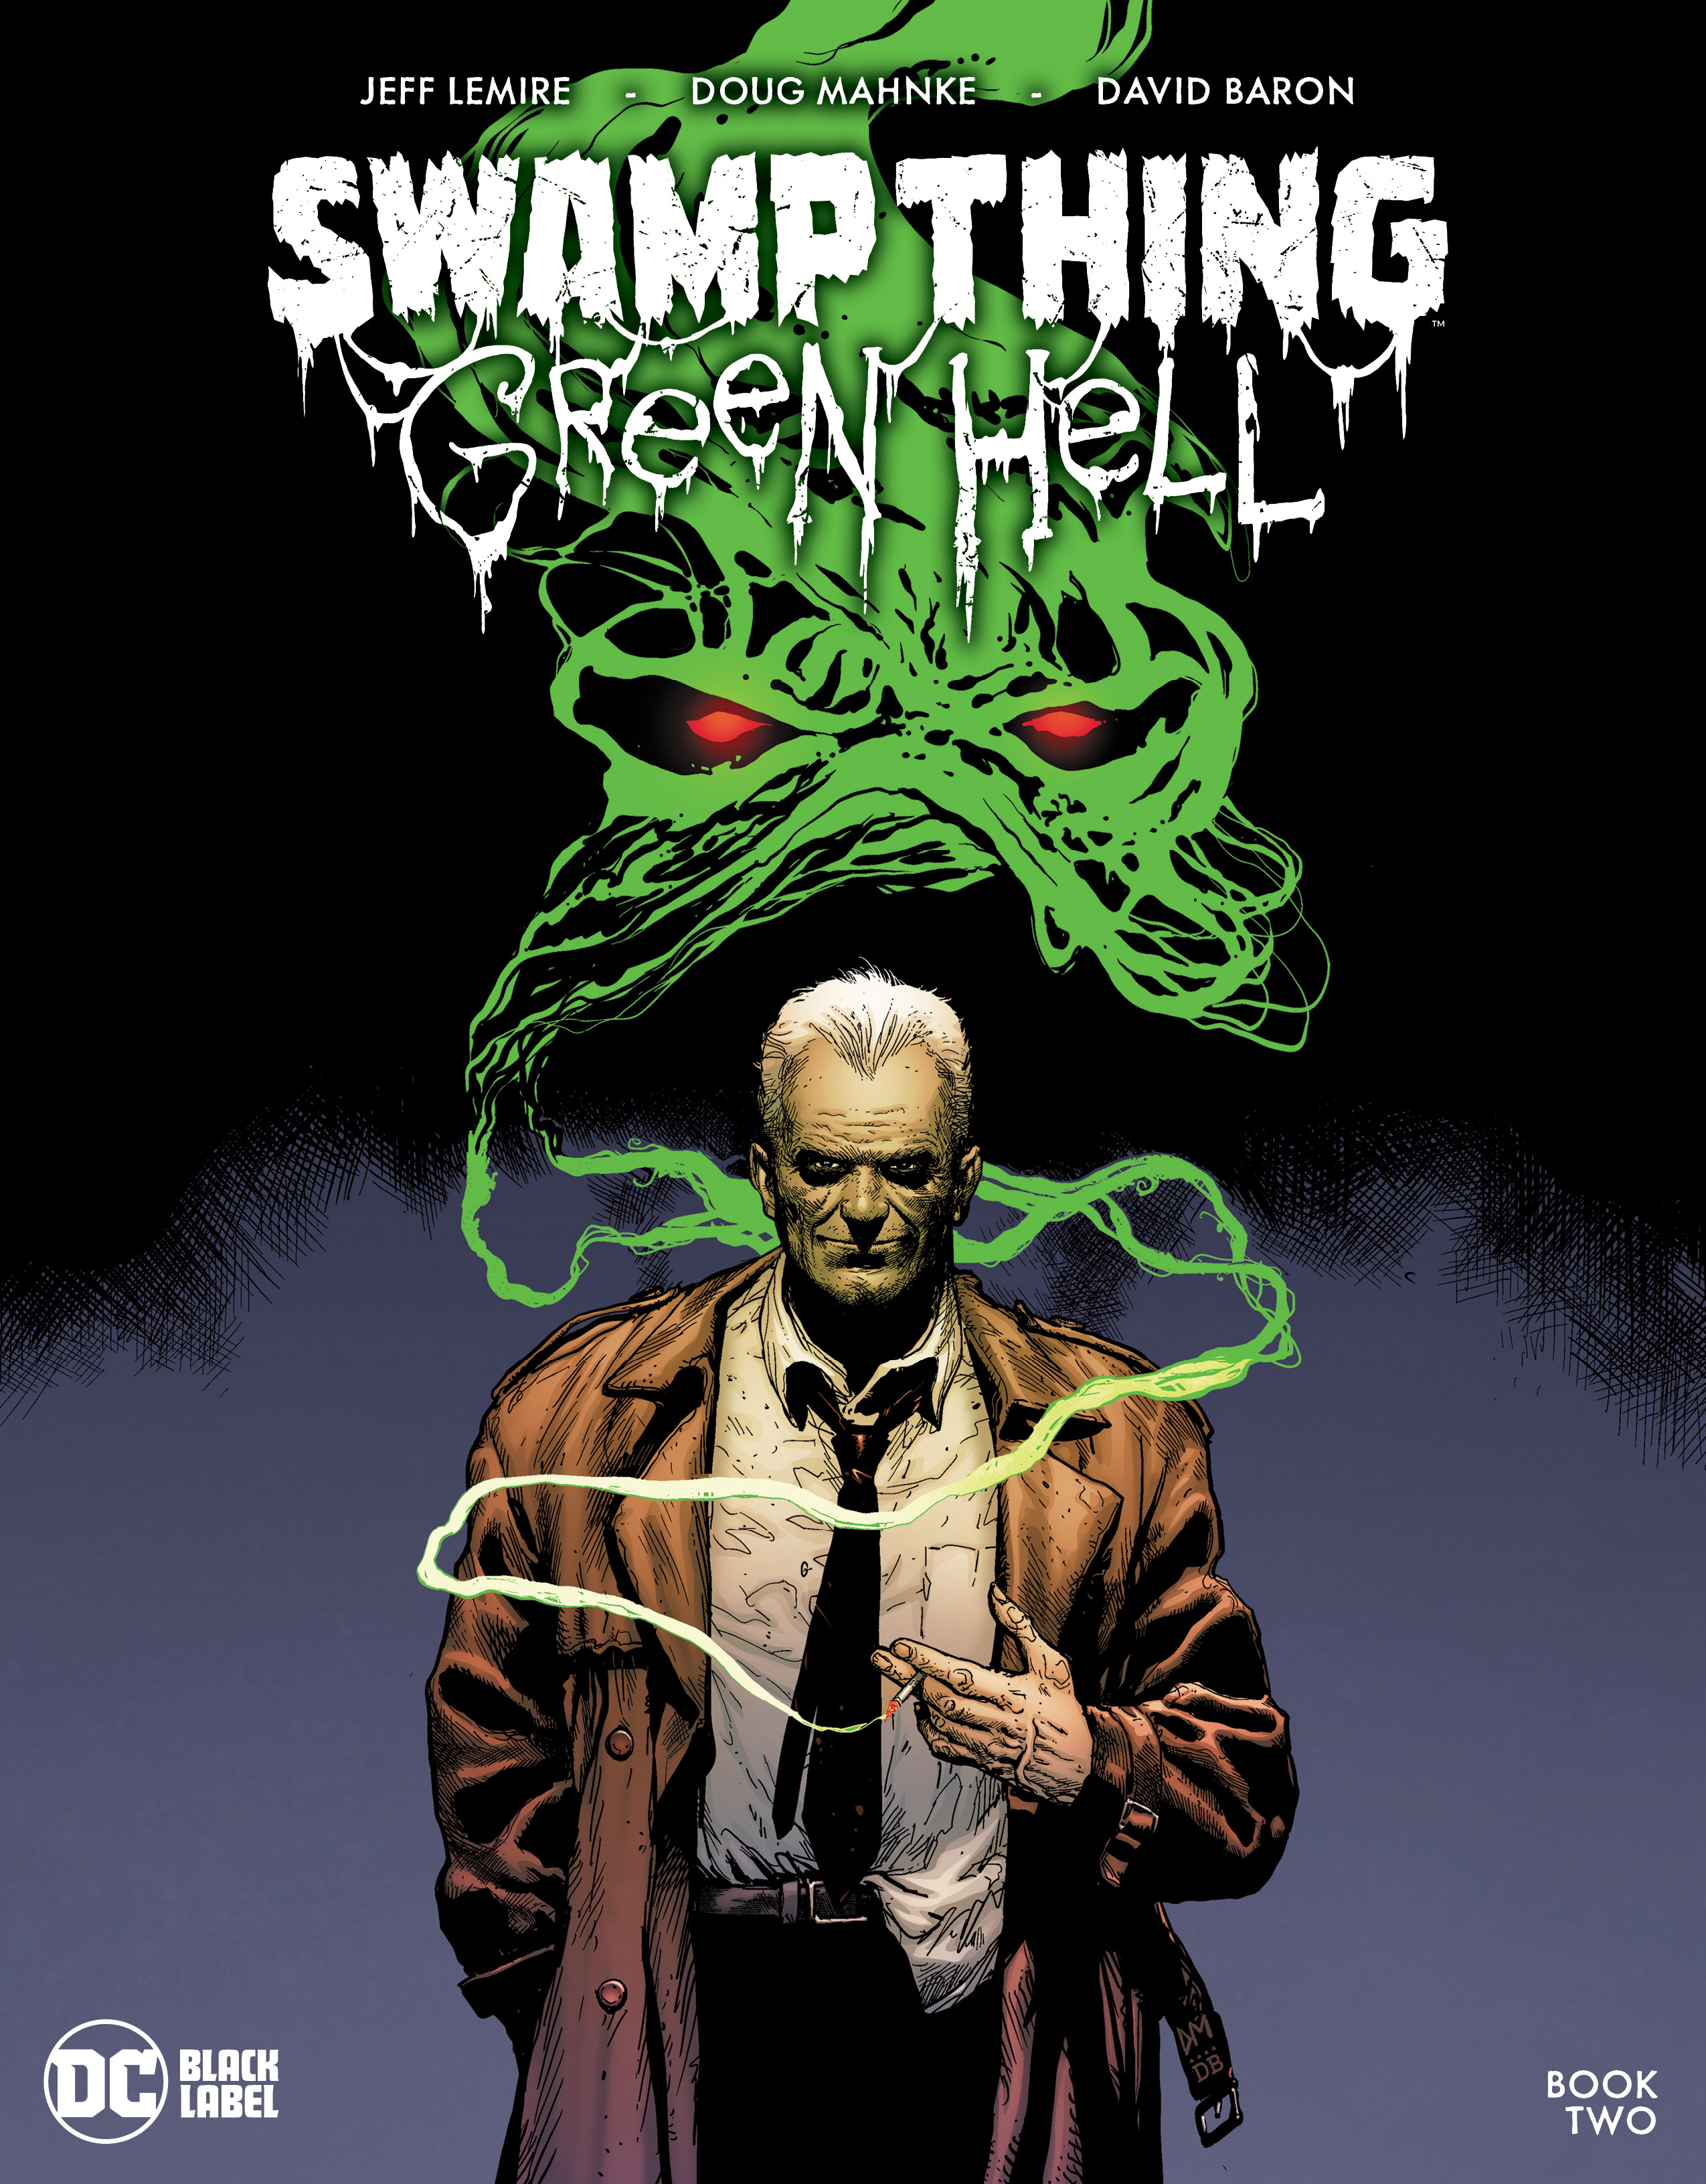 Swamp Thing Green Hell #2 Cover A Doug Mahnke (Mature) (Of 3)